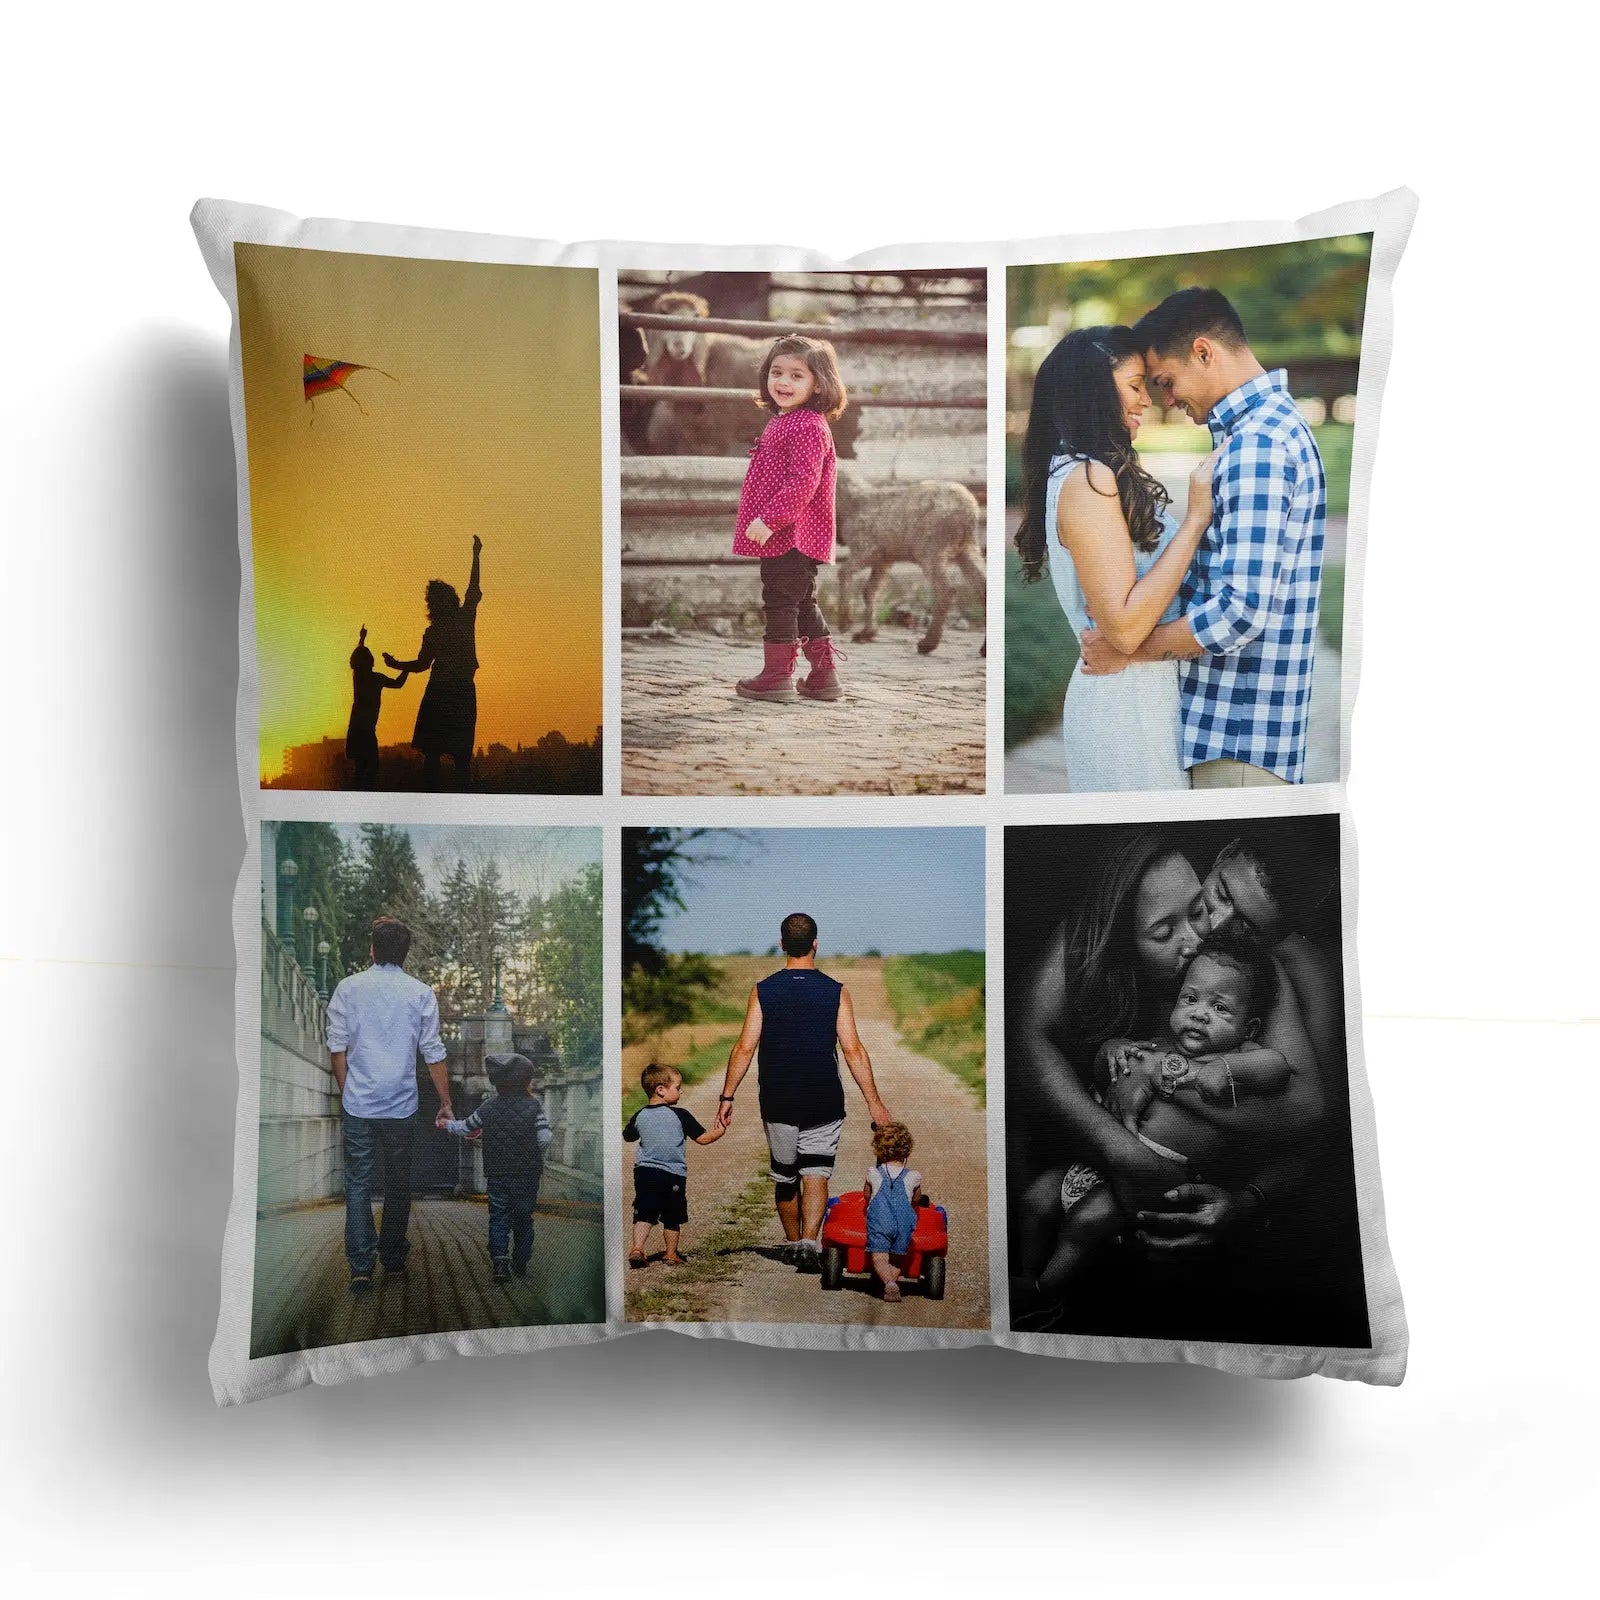 Personalised Collage Style  Cushion Cover  40x40cm  Photo Cushion - 6 Images